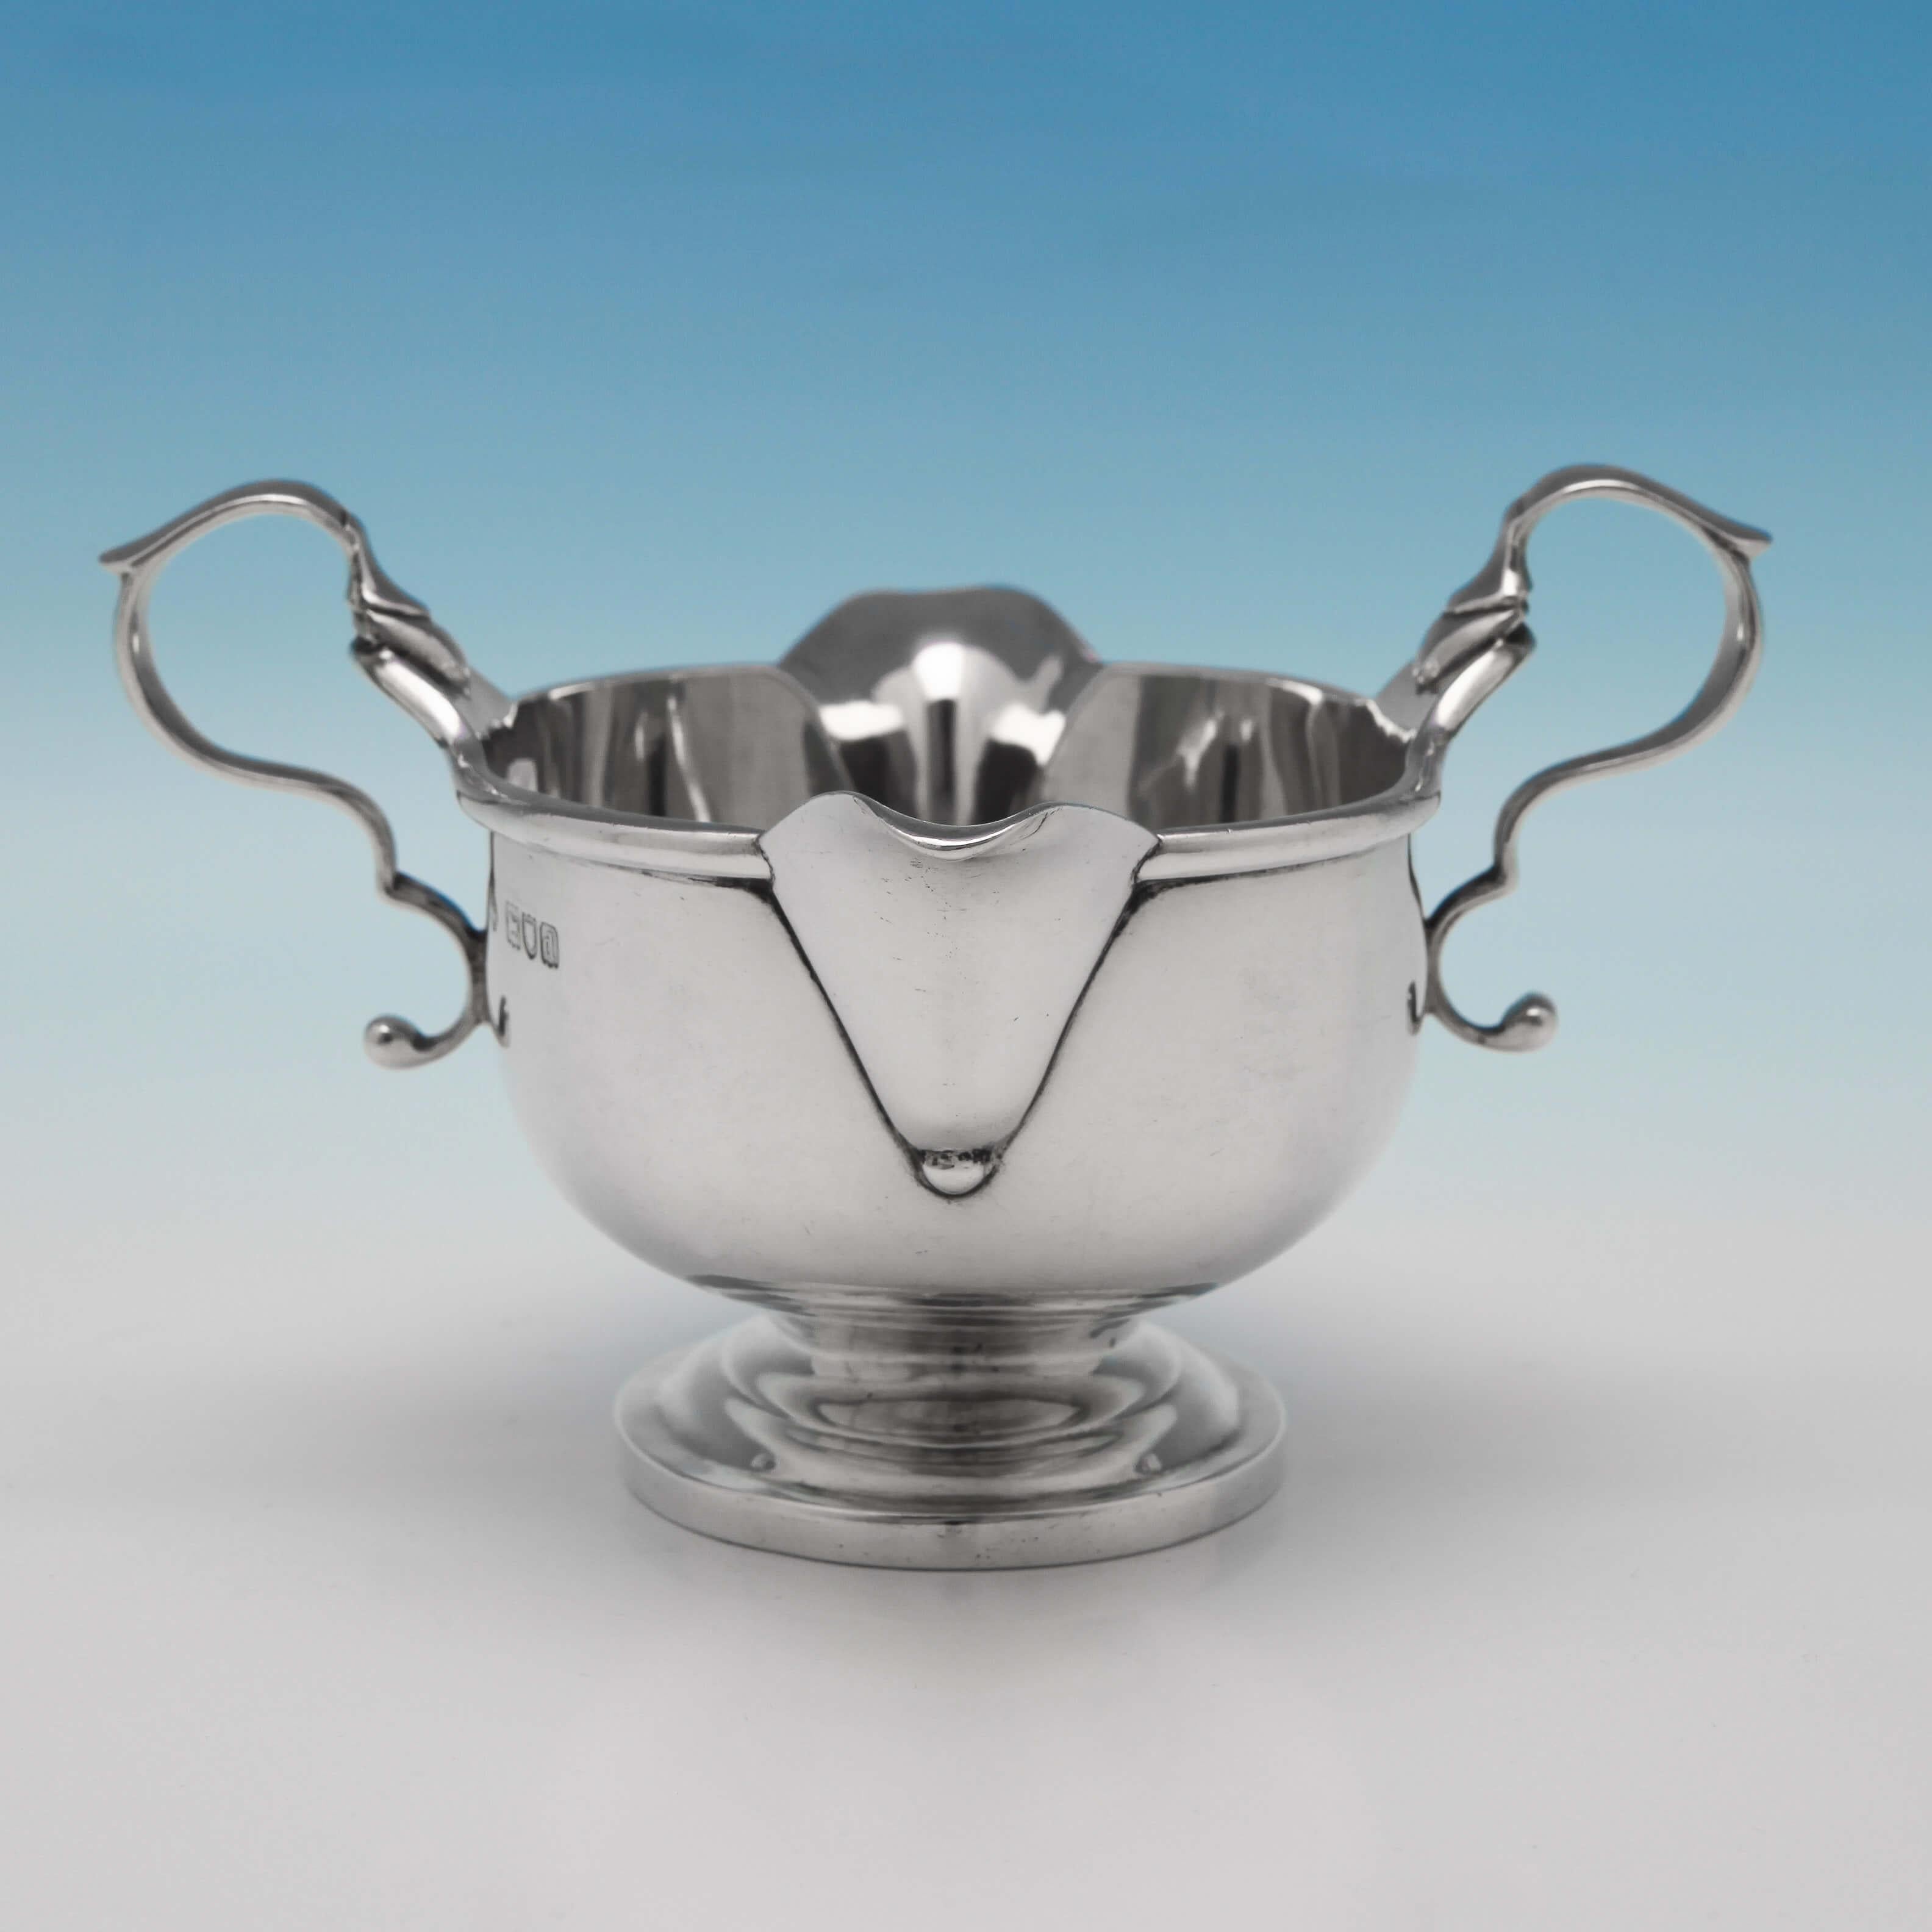 Art Nouveau Victorian Double Sided Antique Sterling Silver Sauce Boat by Carringtons in 1899